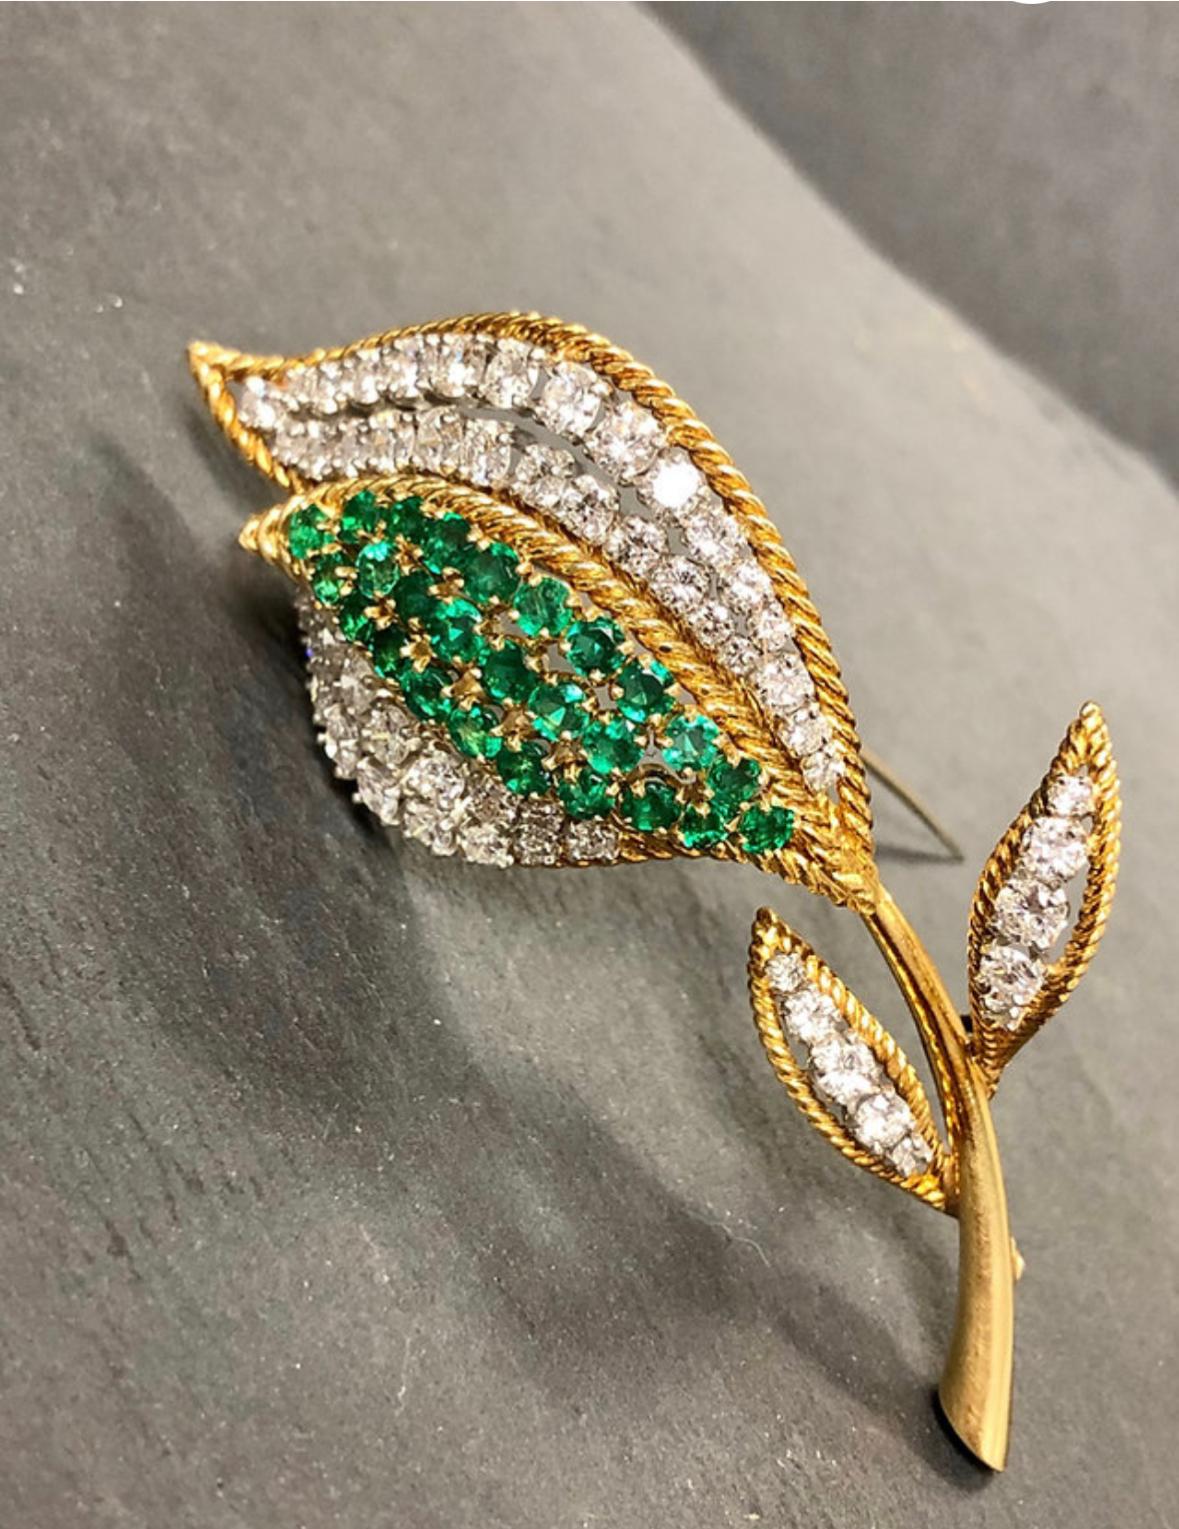 A beautifully made vintage brooch circa the 1960’s done in rich 18K yellow gold and platinum. It has been set with approximately 3.75cttw in G-H Vs clarity round diamonds and finished with vibrantly green natural emeralds.

Dimensions/Weight
2 3/4”